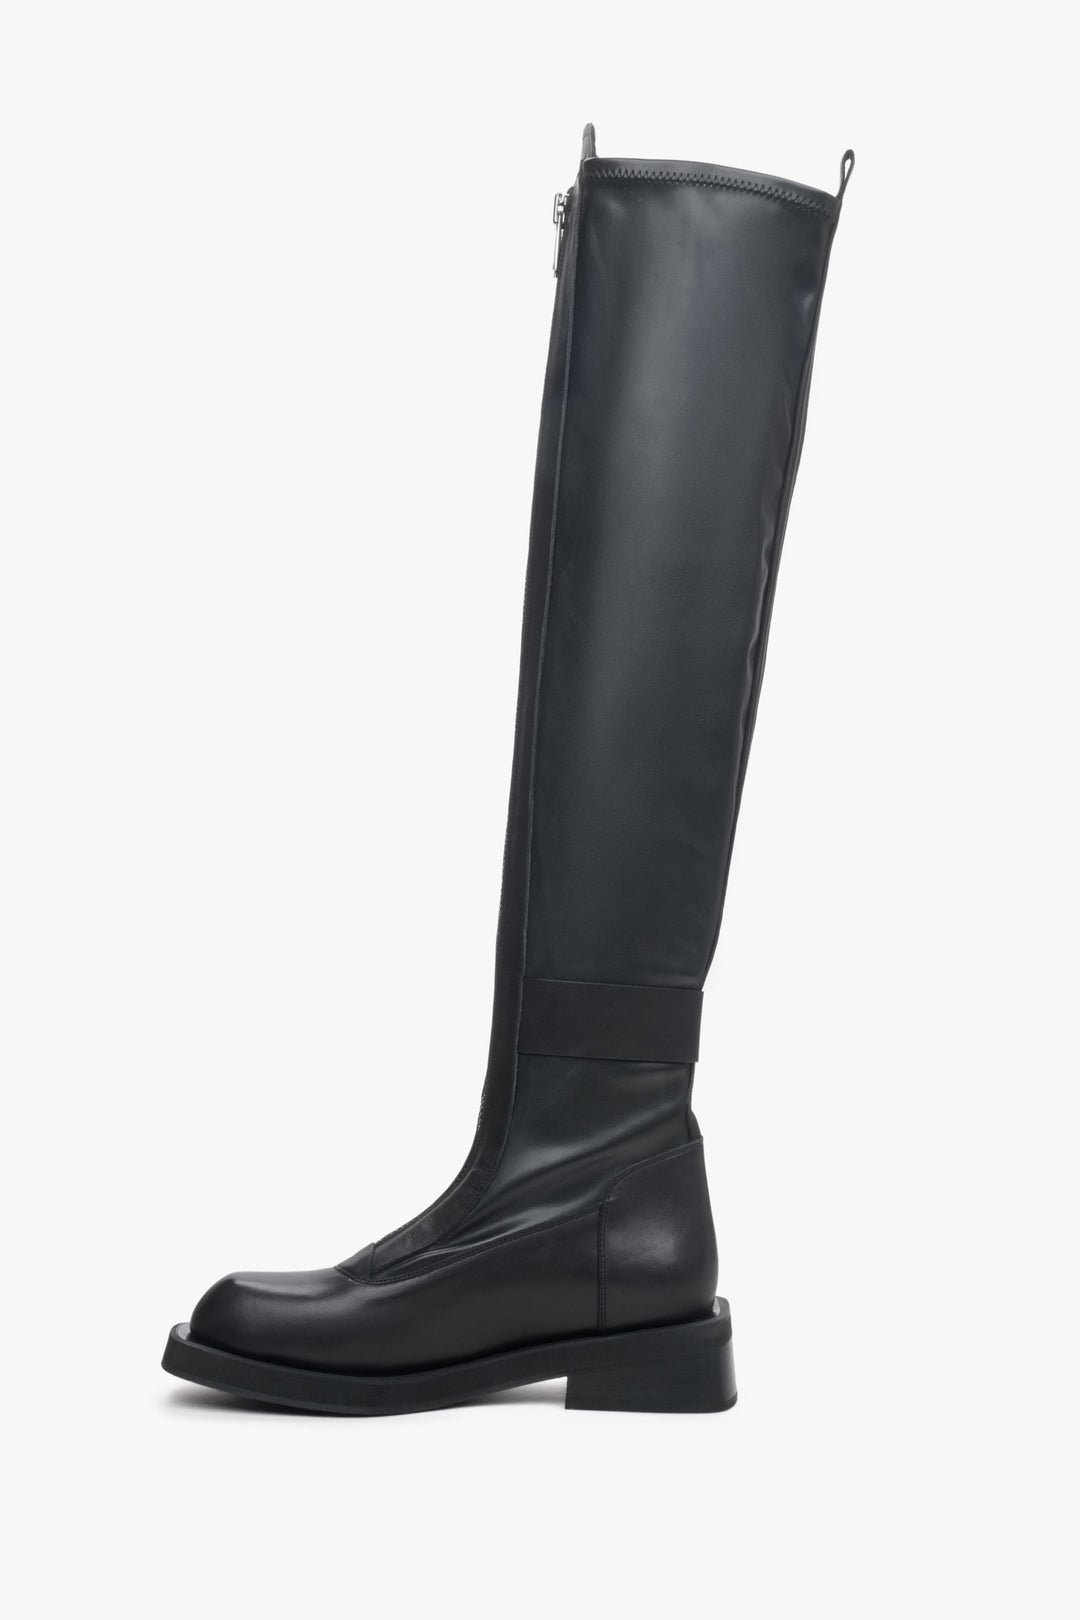 Estro women's  black leather over-the-knee boots with elastic shaft - boot profile.